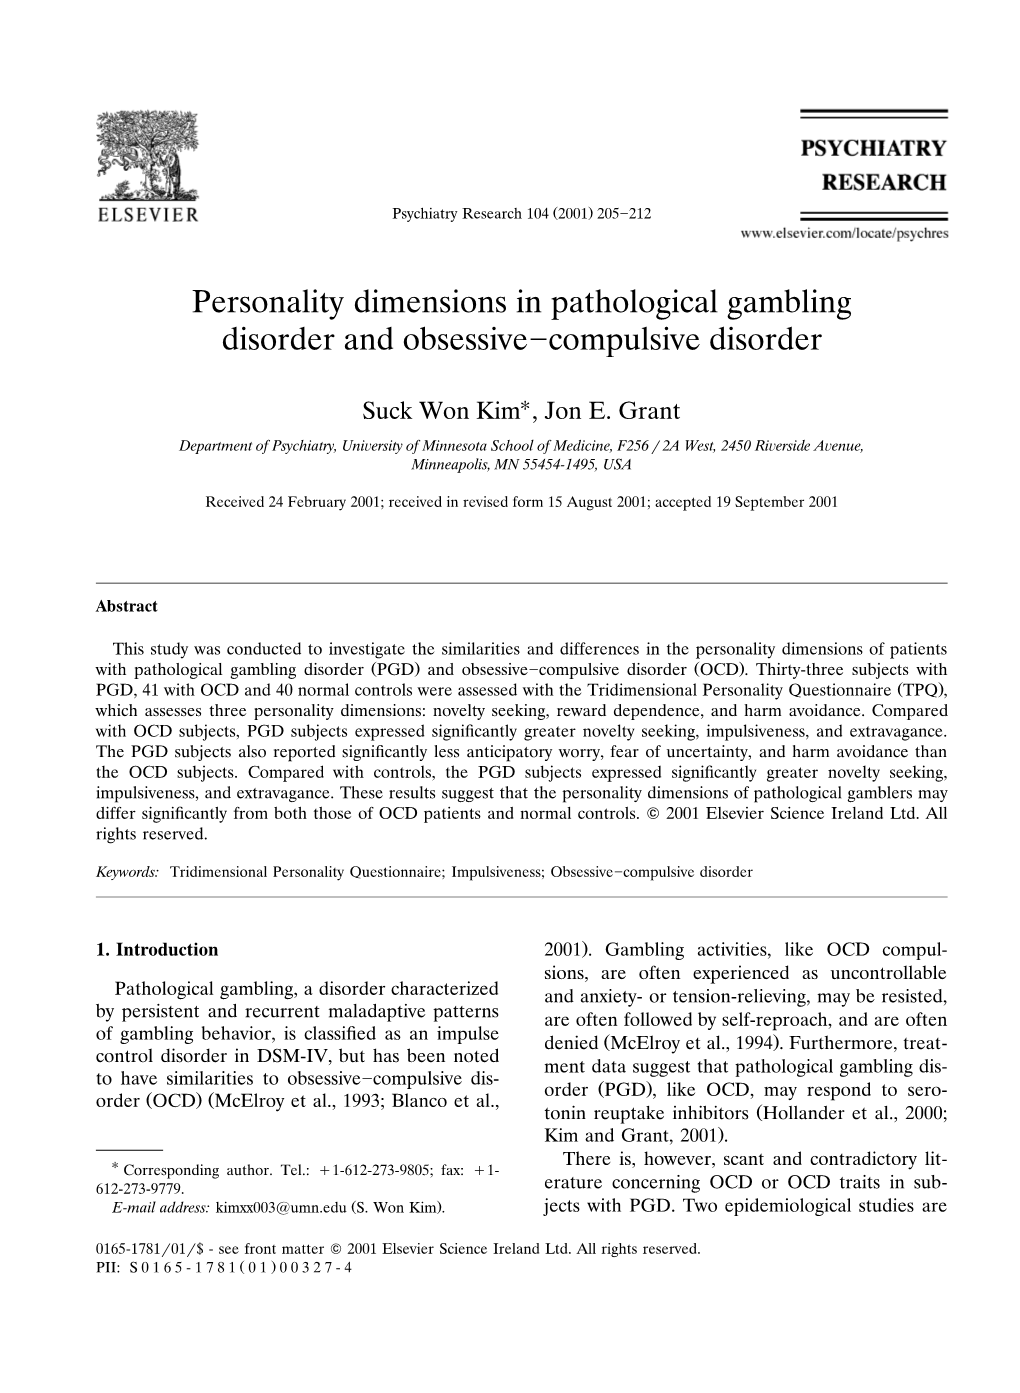 Personality Dimensions in Pathological Gambling Disorder and Obsessive᎐Compulsive Disorder